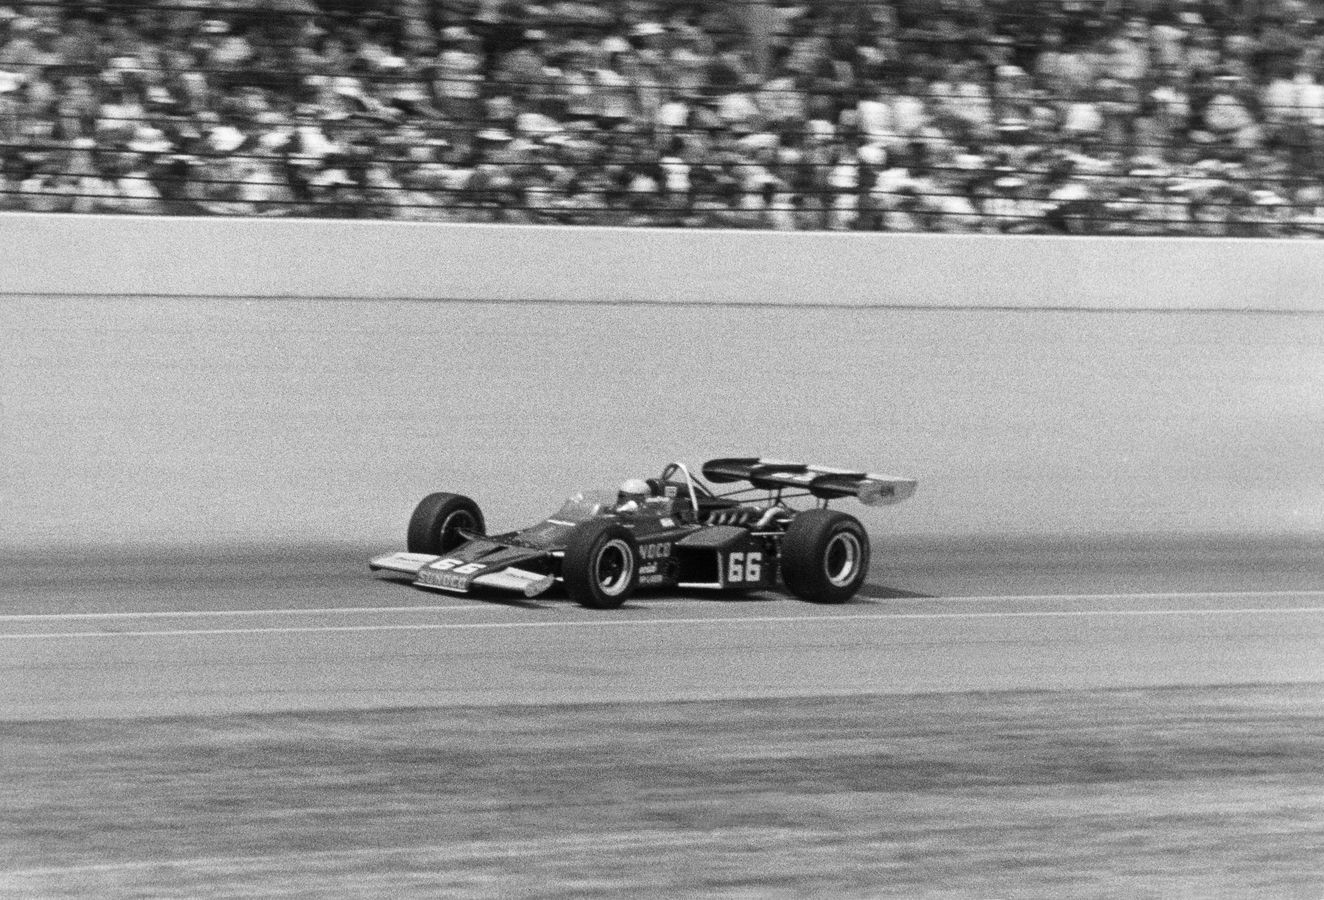 Mark Donohue in the McLaren M16B, 27 May 1972